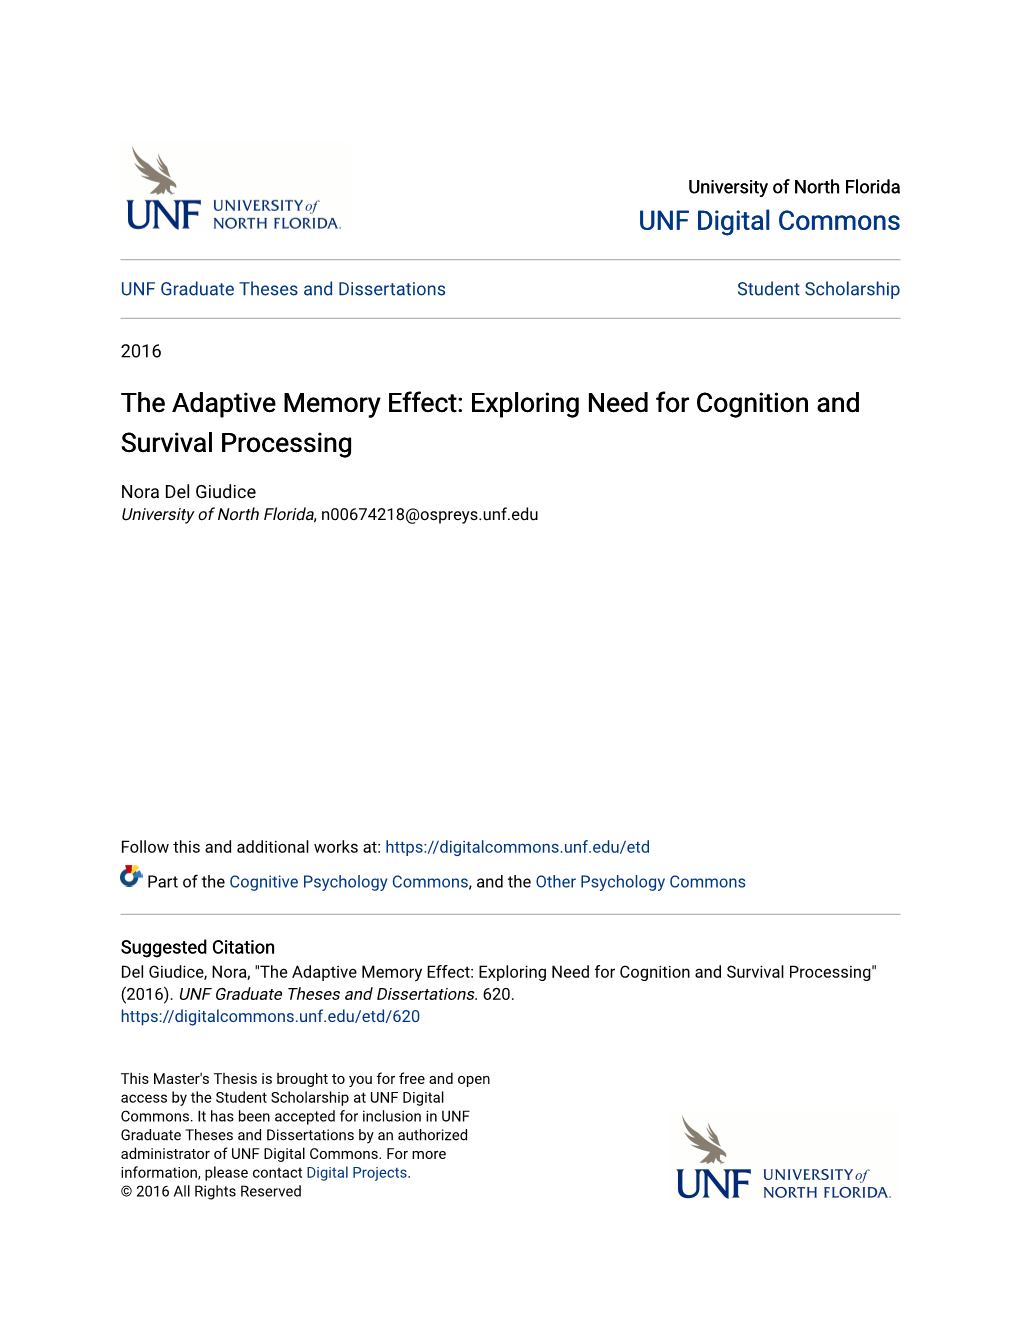 The Adaptive Memory Effect: Exploring Need for Cognition and Survival Processing